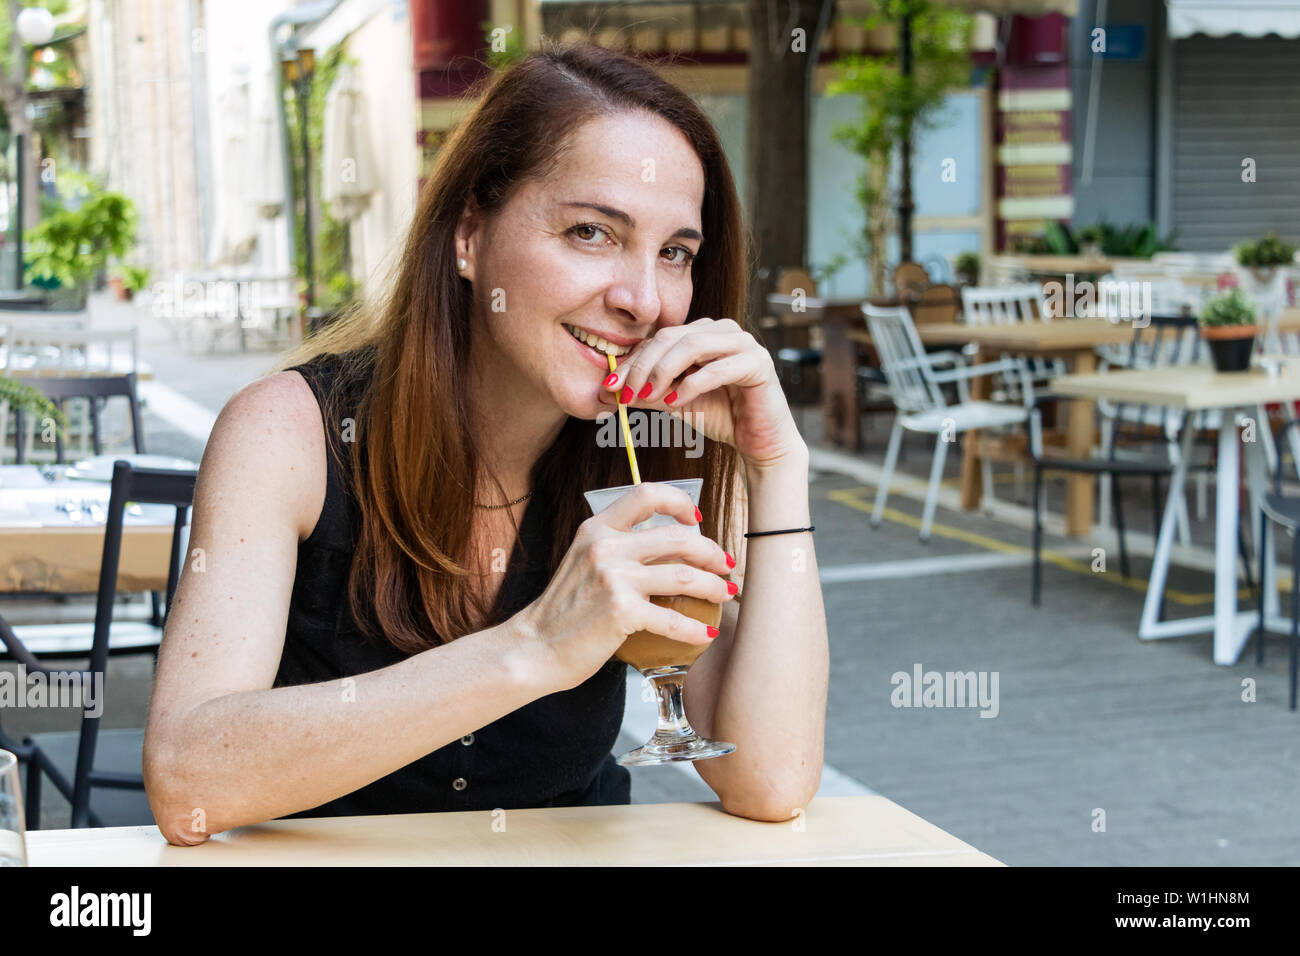 Portrait of a mature woman, 40s, having a cold freddo cappuccino coffee sitting outdoors looking camera. Stock Photo